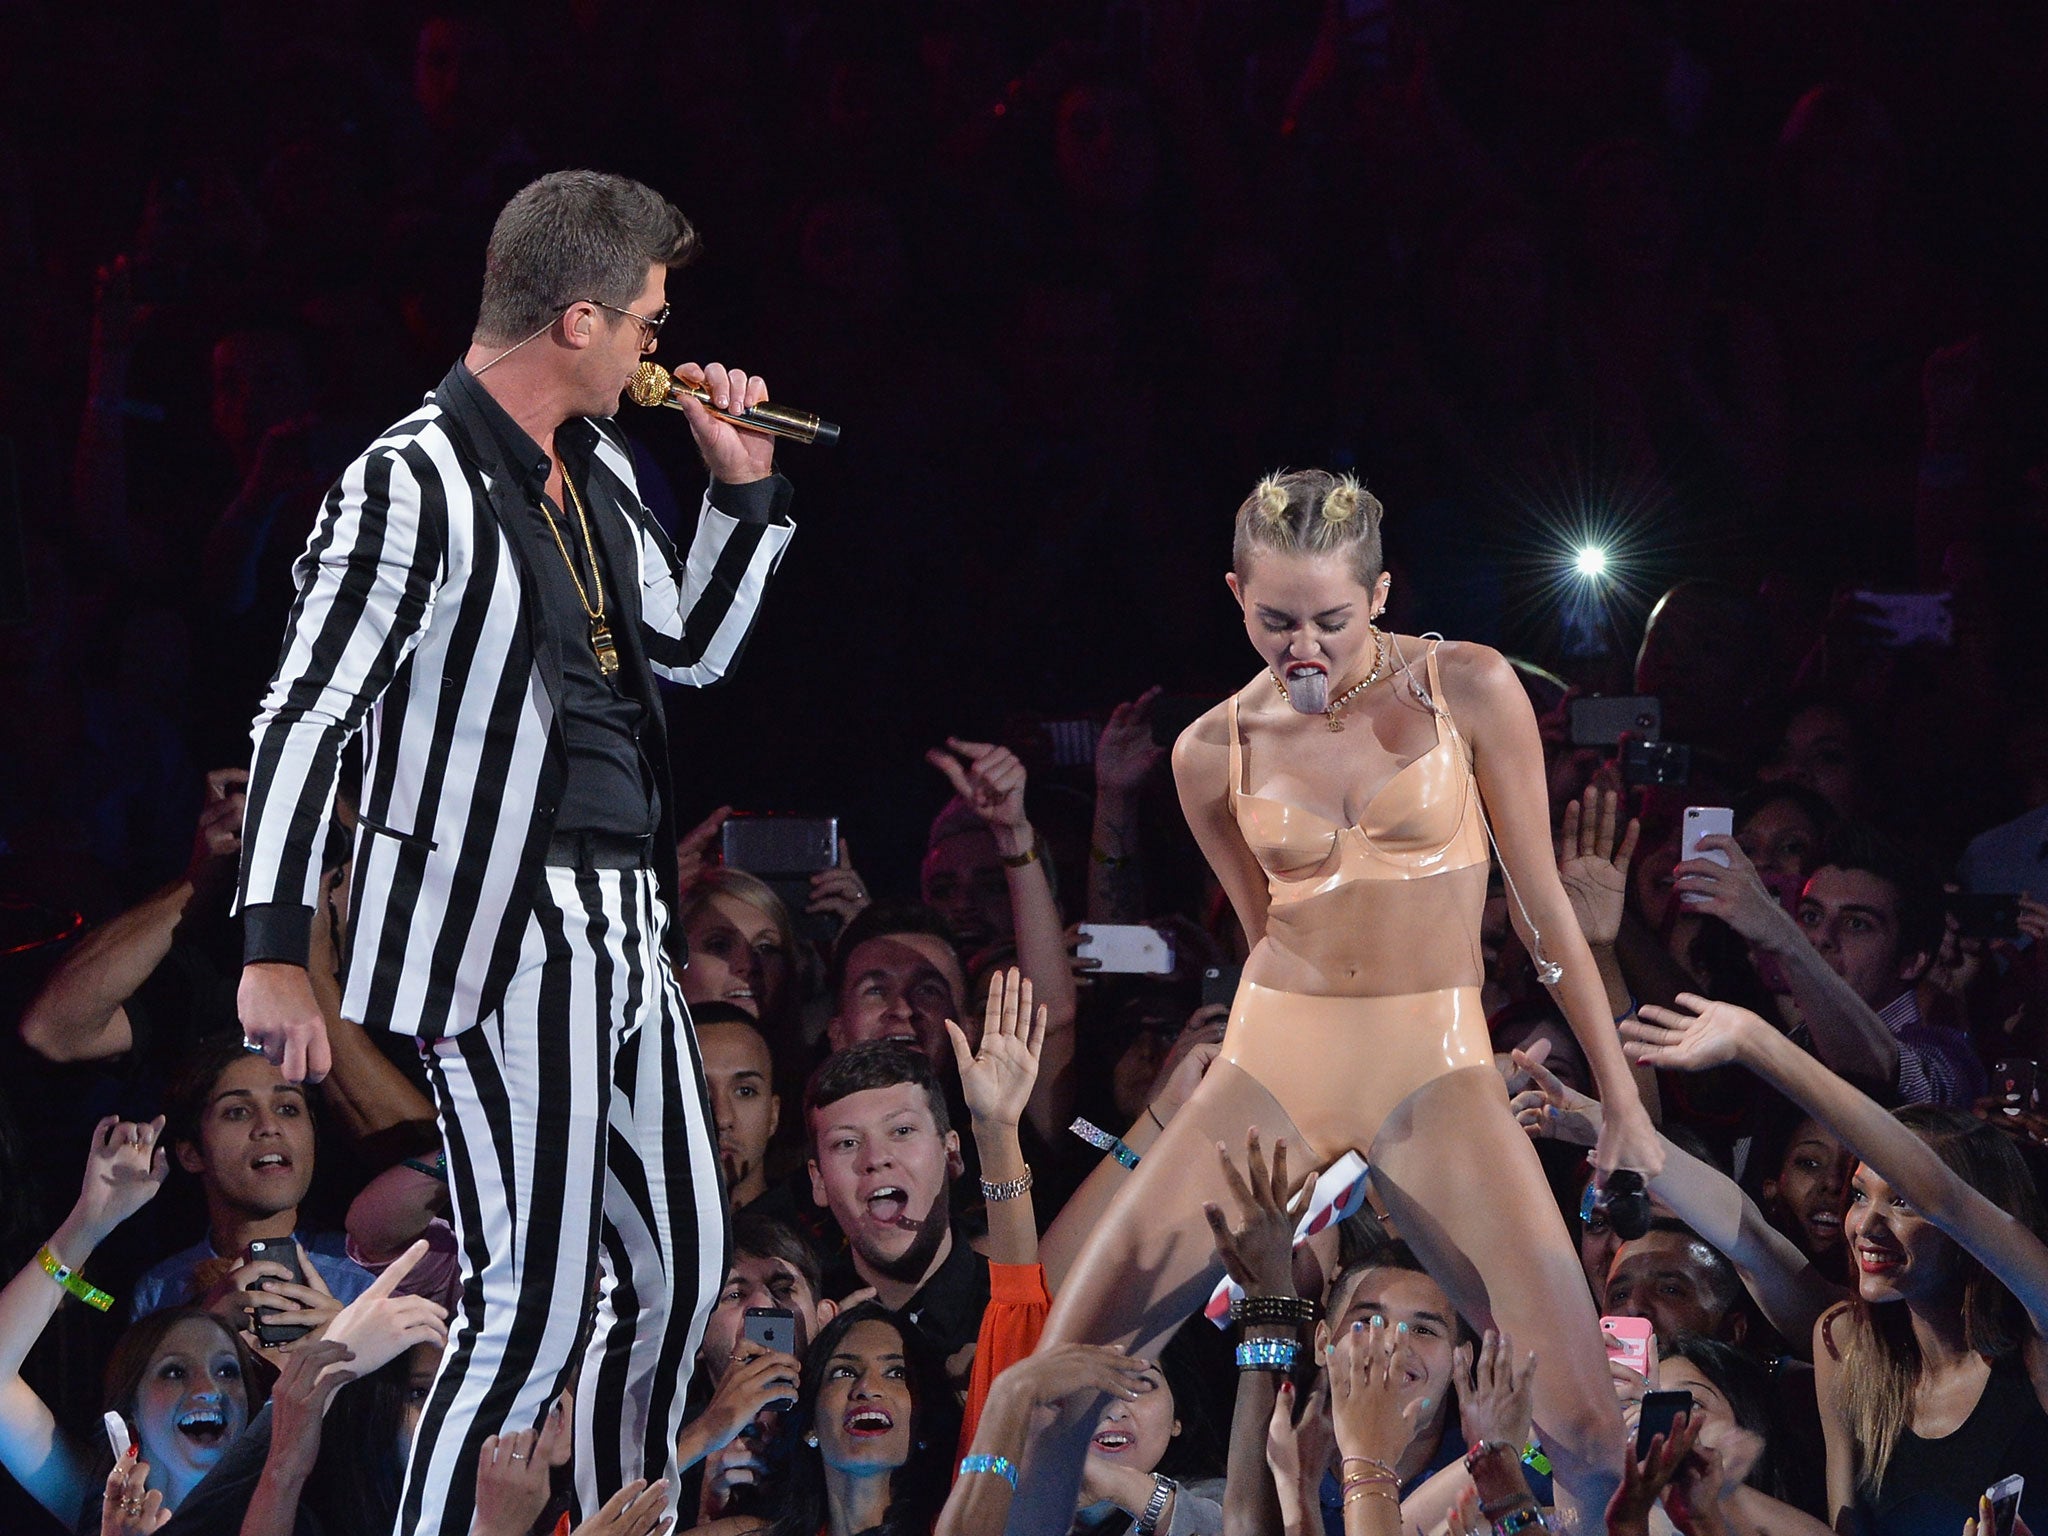 Robin Thicke and Miley Cyrus perform on stage during the 2013 MTV Video Music Awards